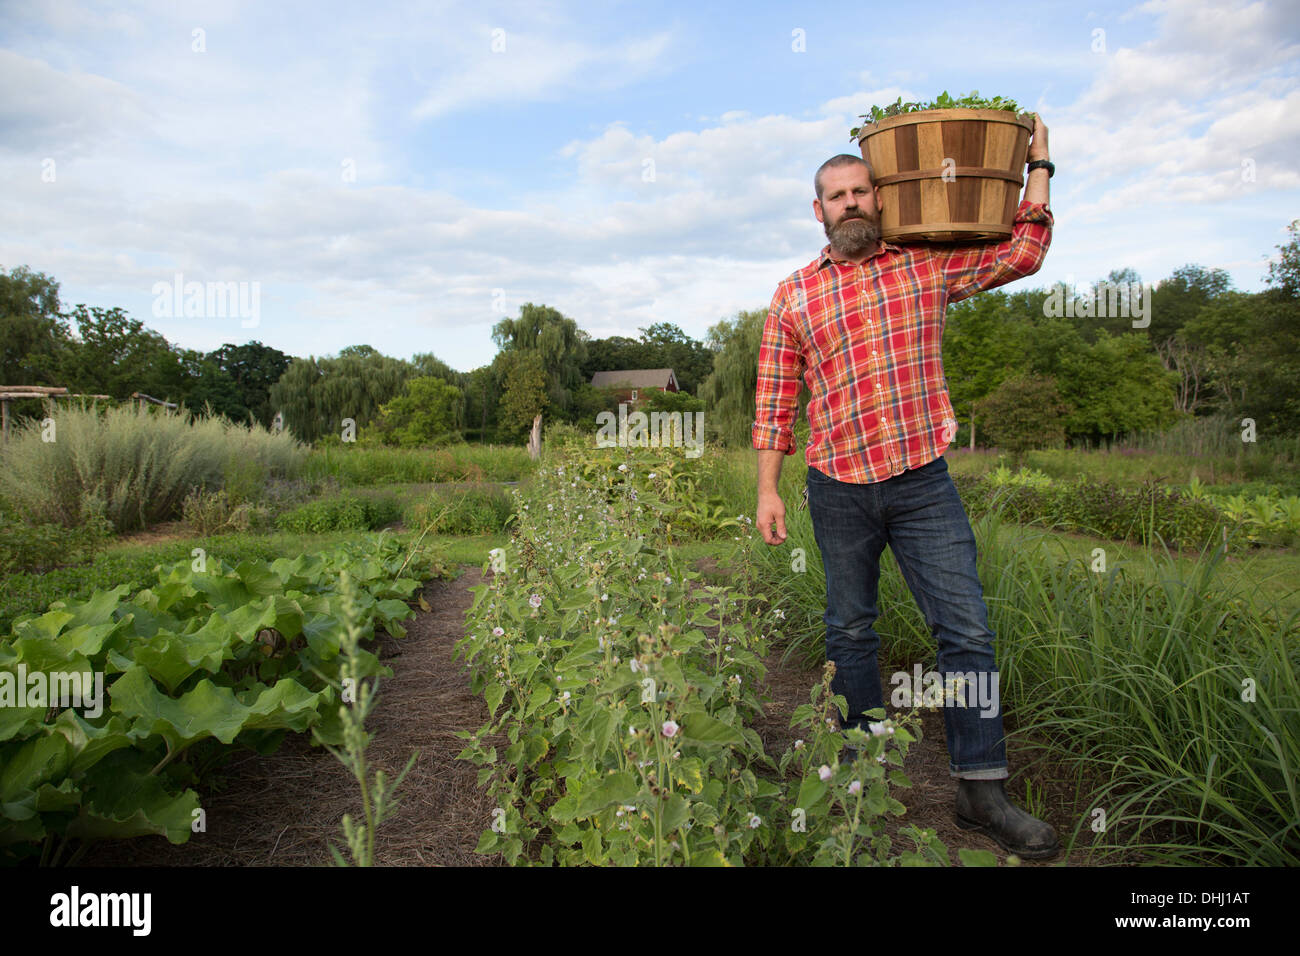 Mature man holding basket of leaves on herb farm Stock Photo